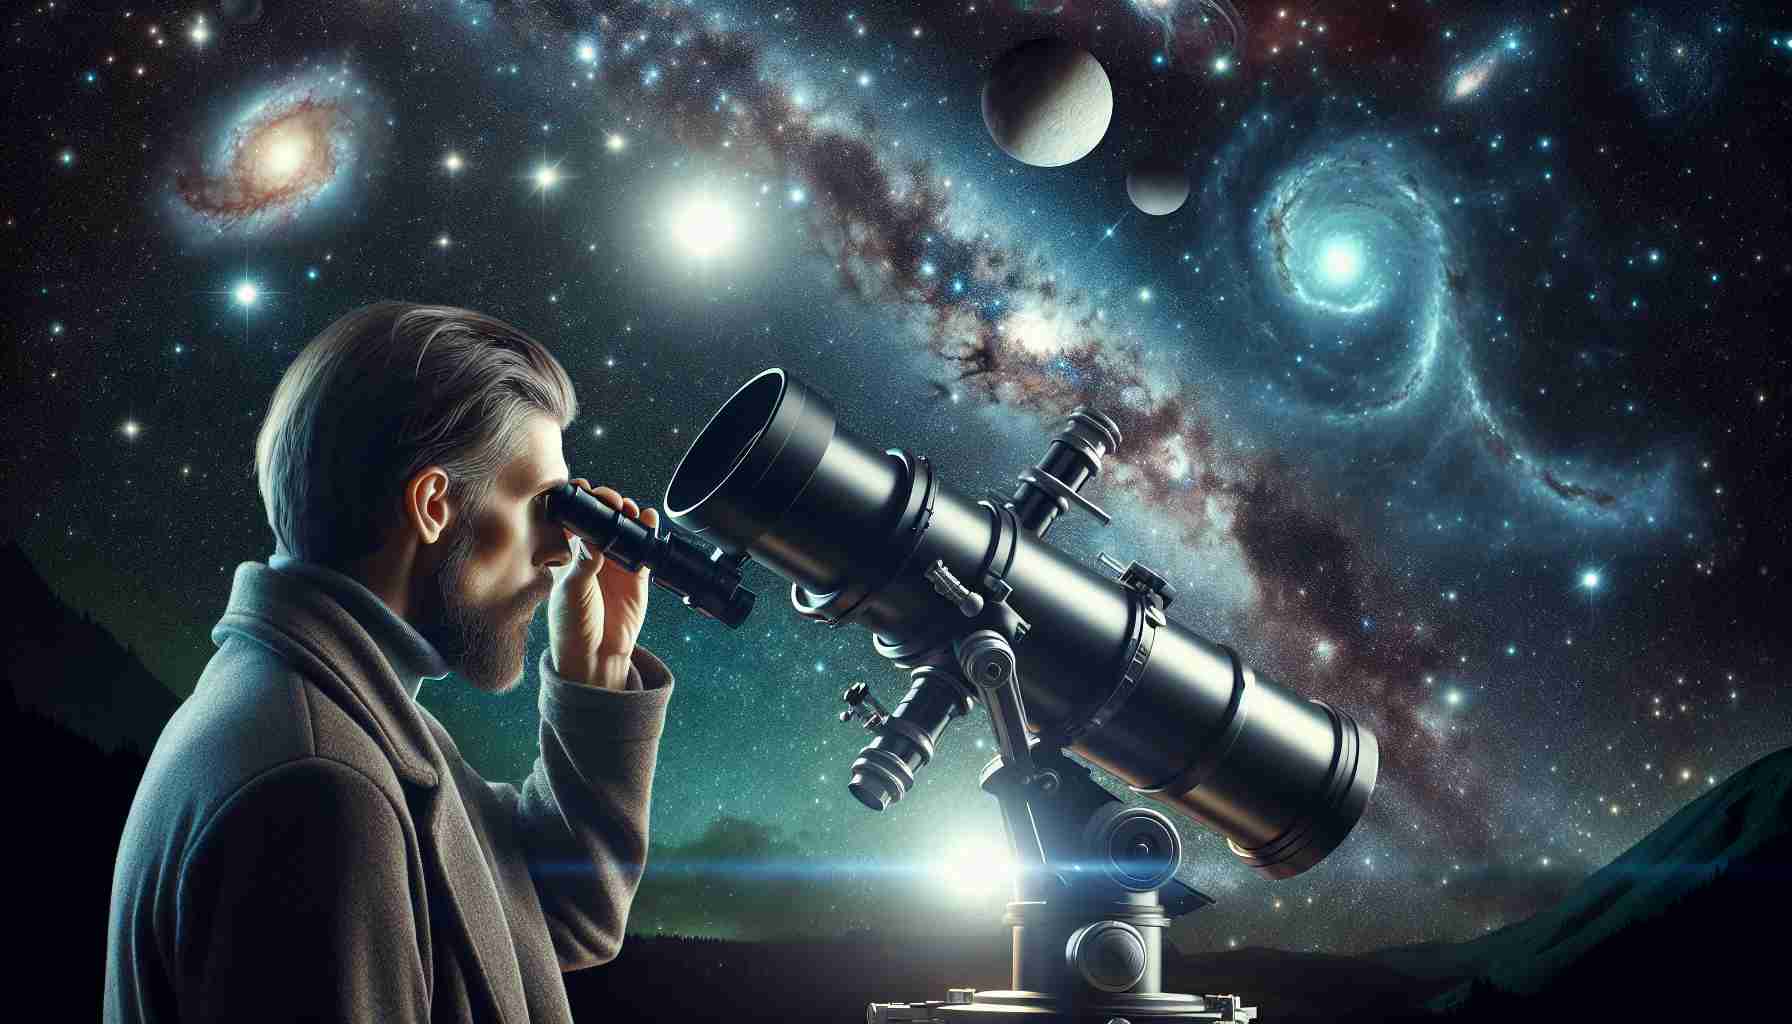 A realistic and high-definition depiction of an individual engrossed in the exploration and discovery of celestial mysteries. The individual is seen with a large telescope, scanning the boundless night sky that is speckled with stars, galaxies, and nebulae. The background is filled with astronomical objects providing the thrill of deep space exploration. Make the scene filled with awe and wonder, while maintaining a balance between the human element of curiosity and the vast, unexplored universe.